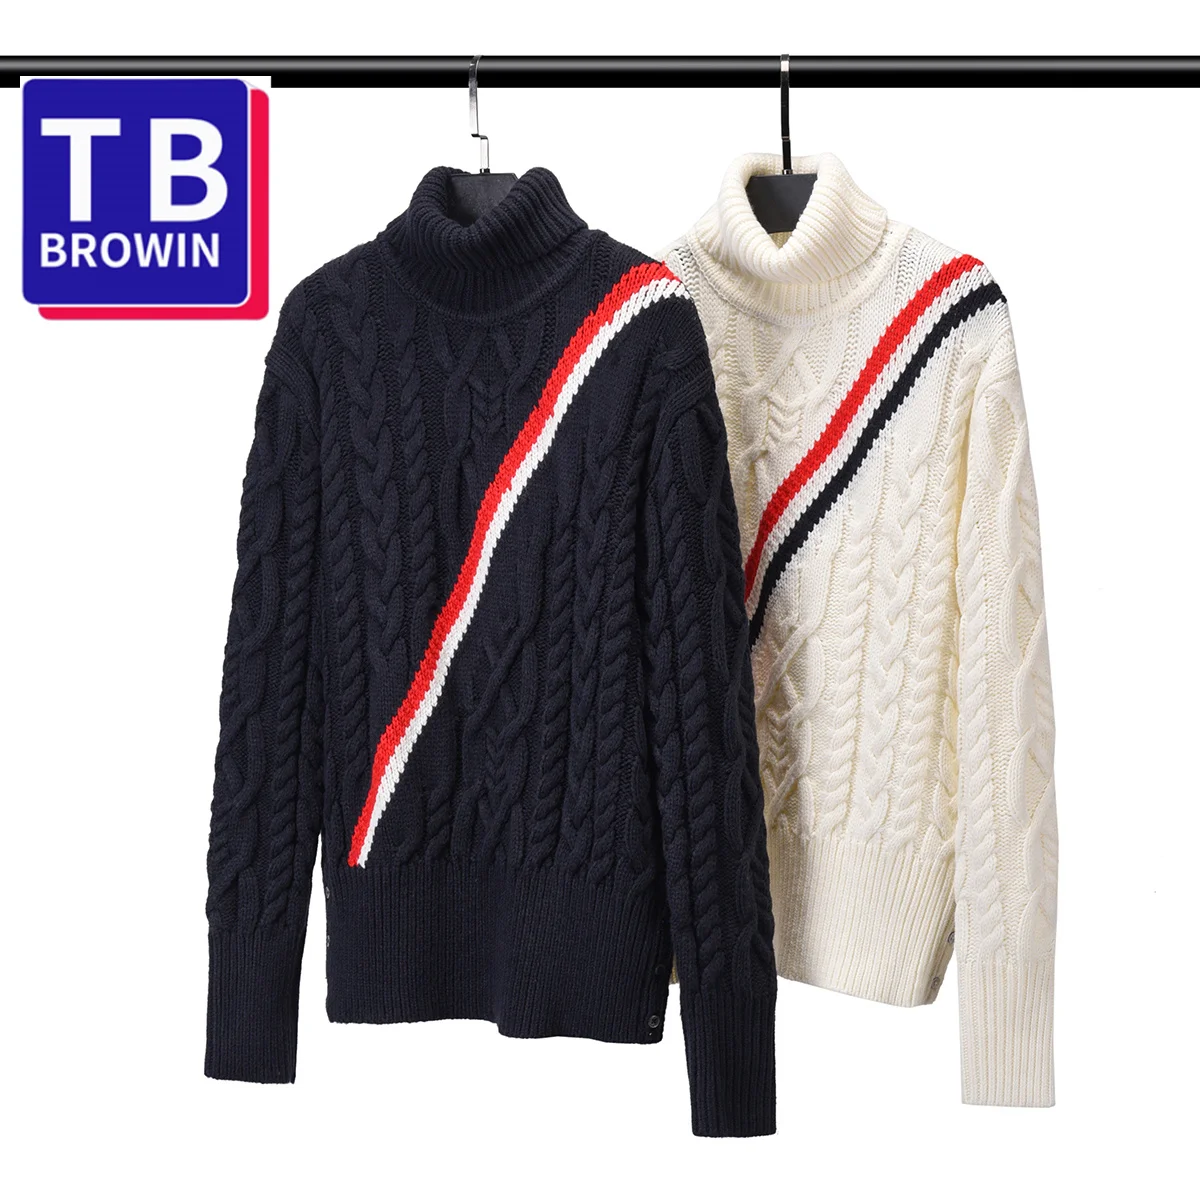 

TB BROWIN new wool tb turtleneck sweater for men and women with British style everyday sweater base knitwear